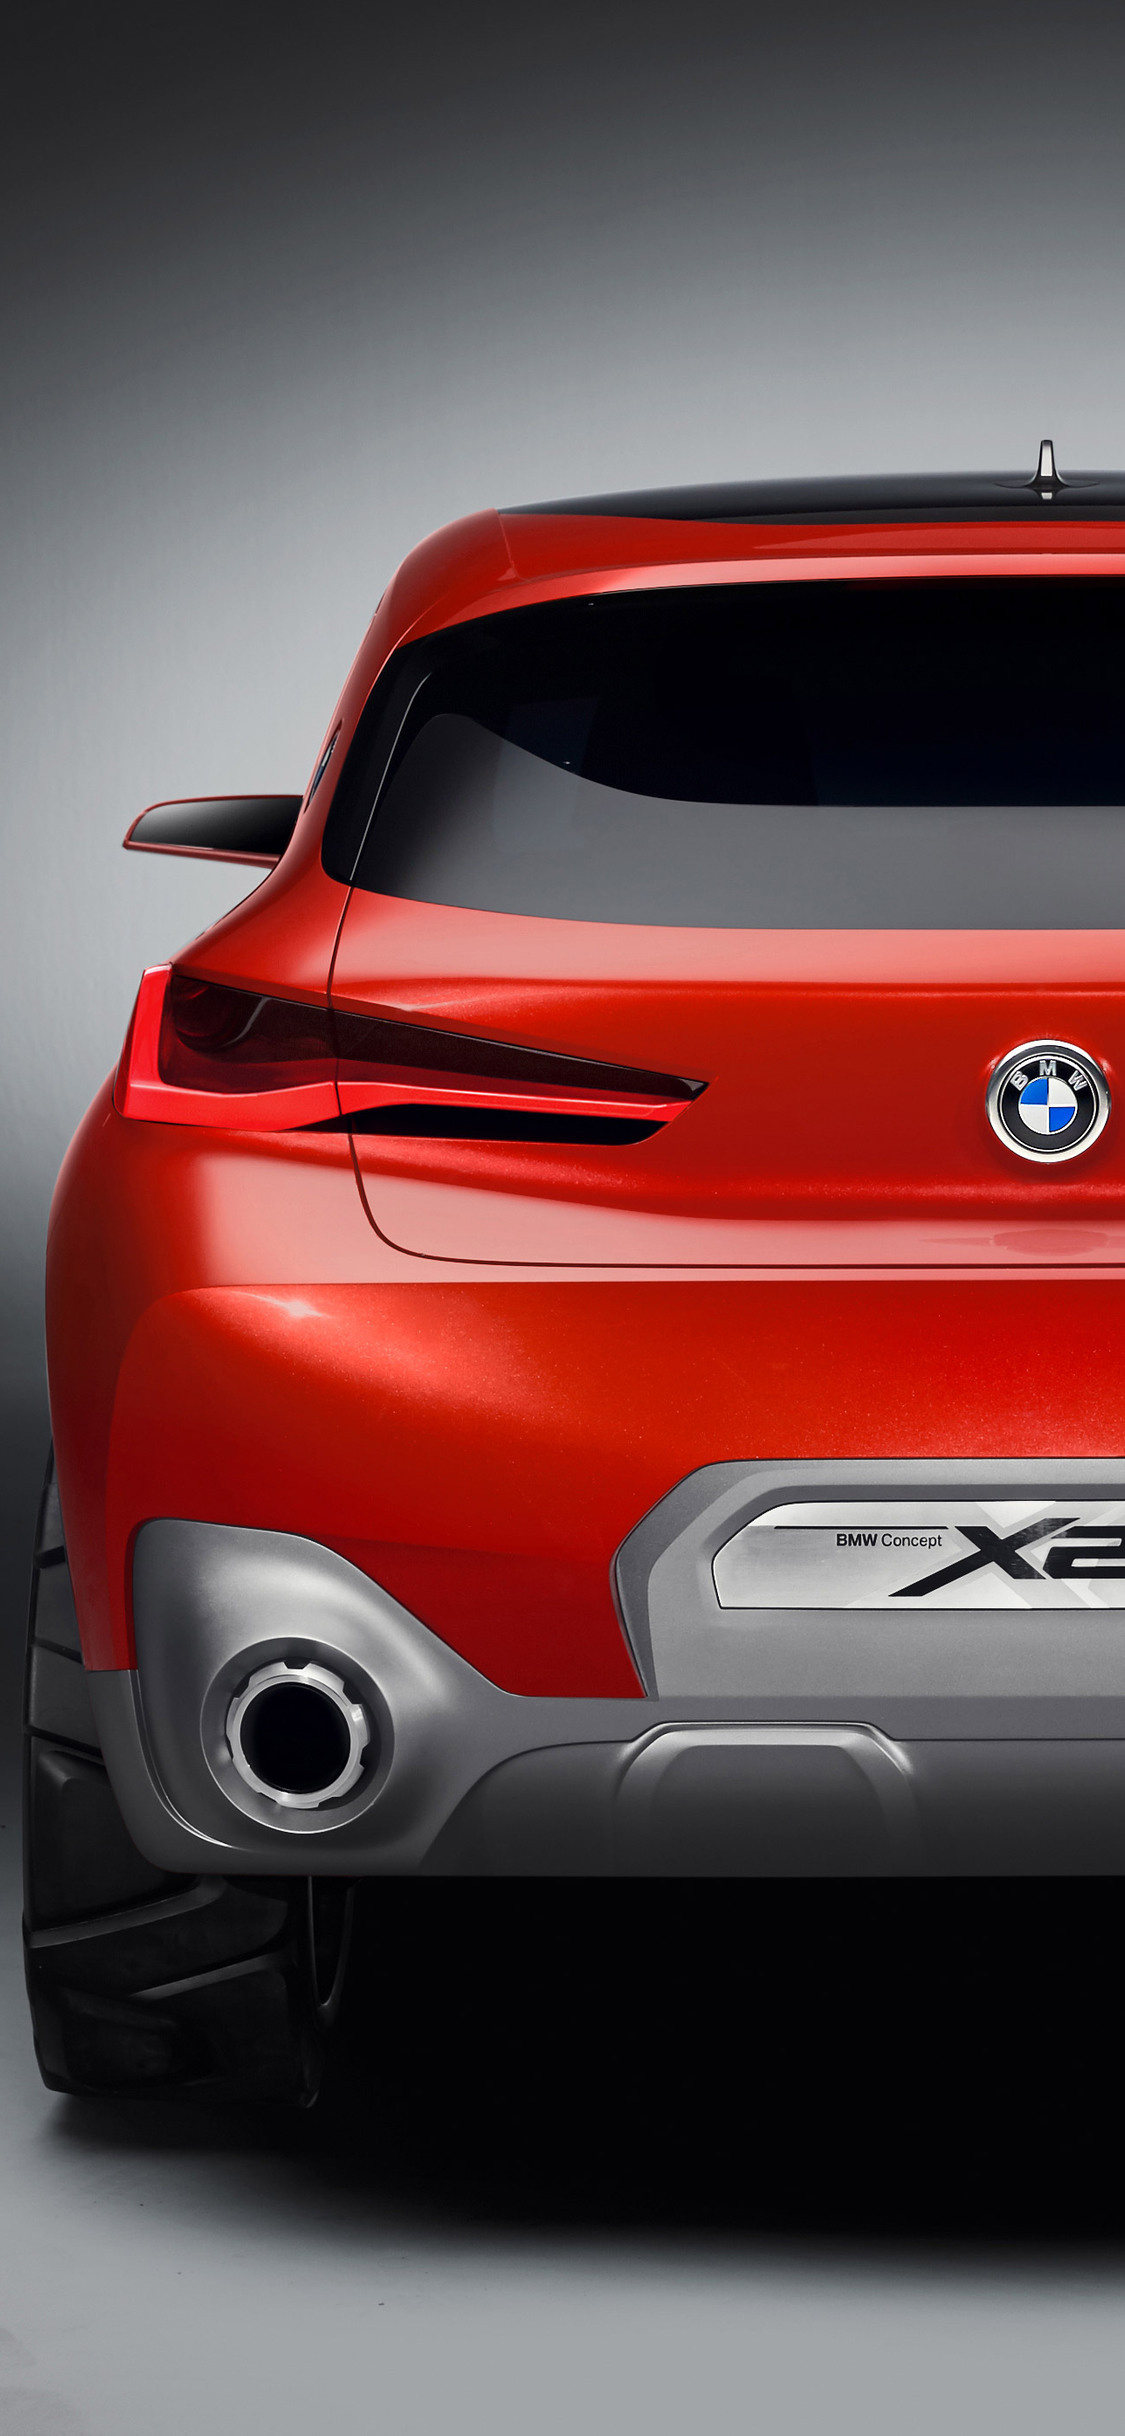 BMW X2, Auto concept car, Rear view, HD wallpapers, 1130x2440 HD Phone